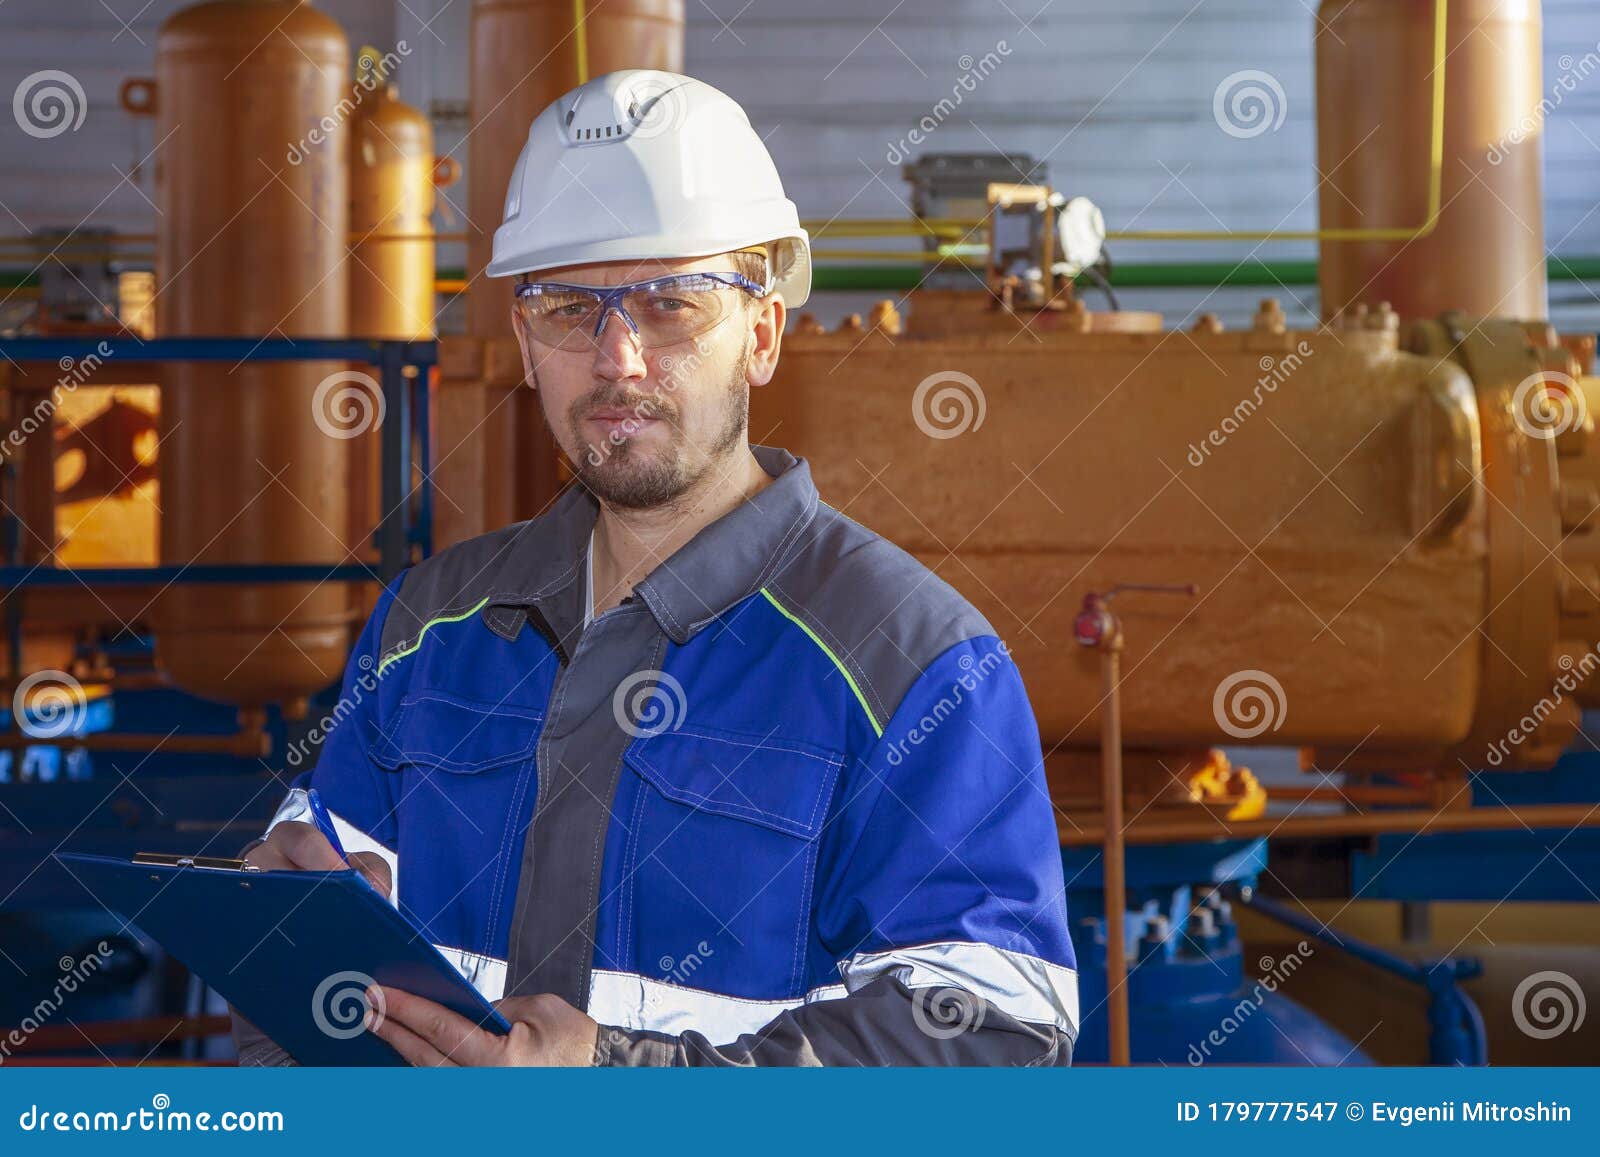 The Mechanic The Repairman Operator Production Gas Oil Gas Industry Gas Conditioning Equipment And Valve Armature Stock Image Image Of Hardhat Exploration 179777547